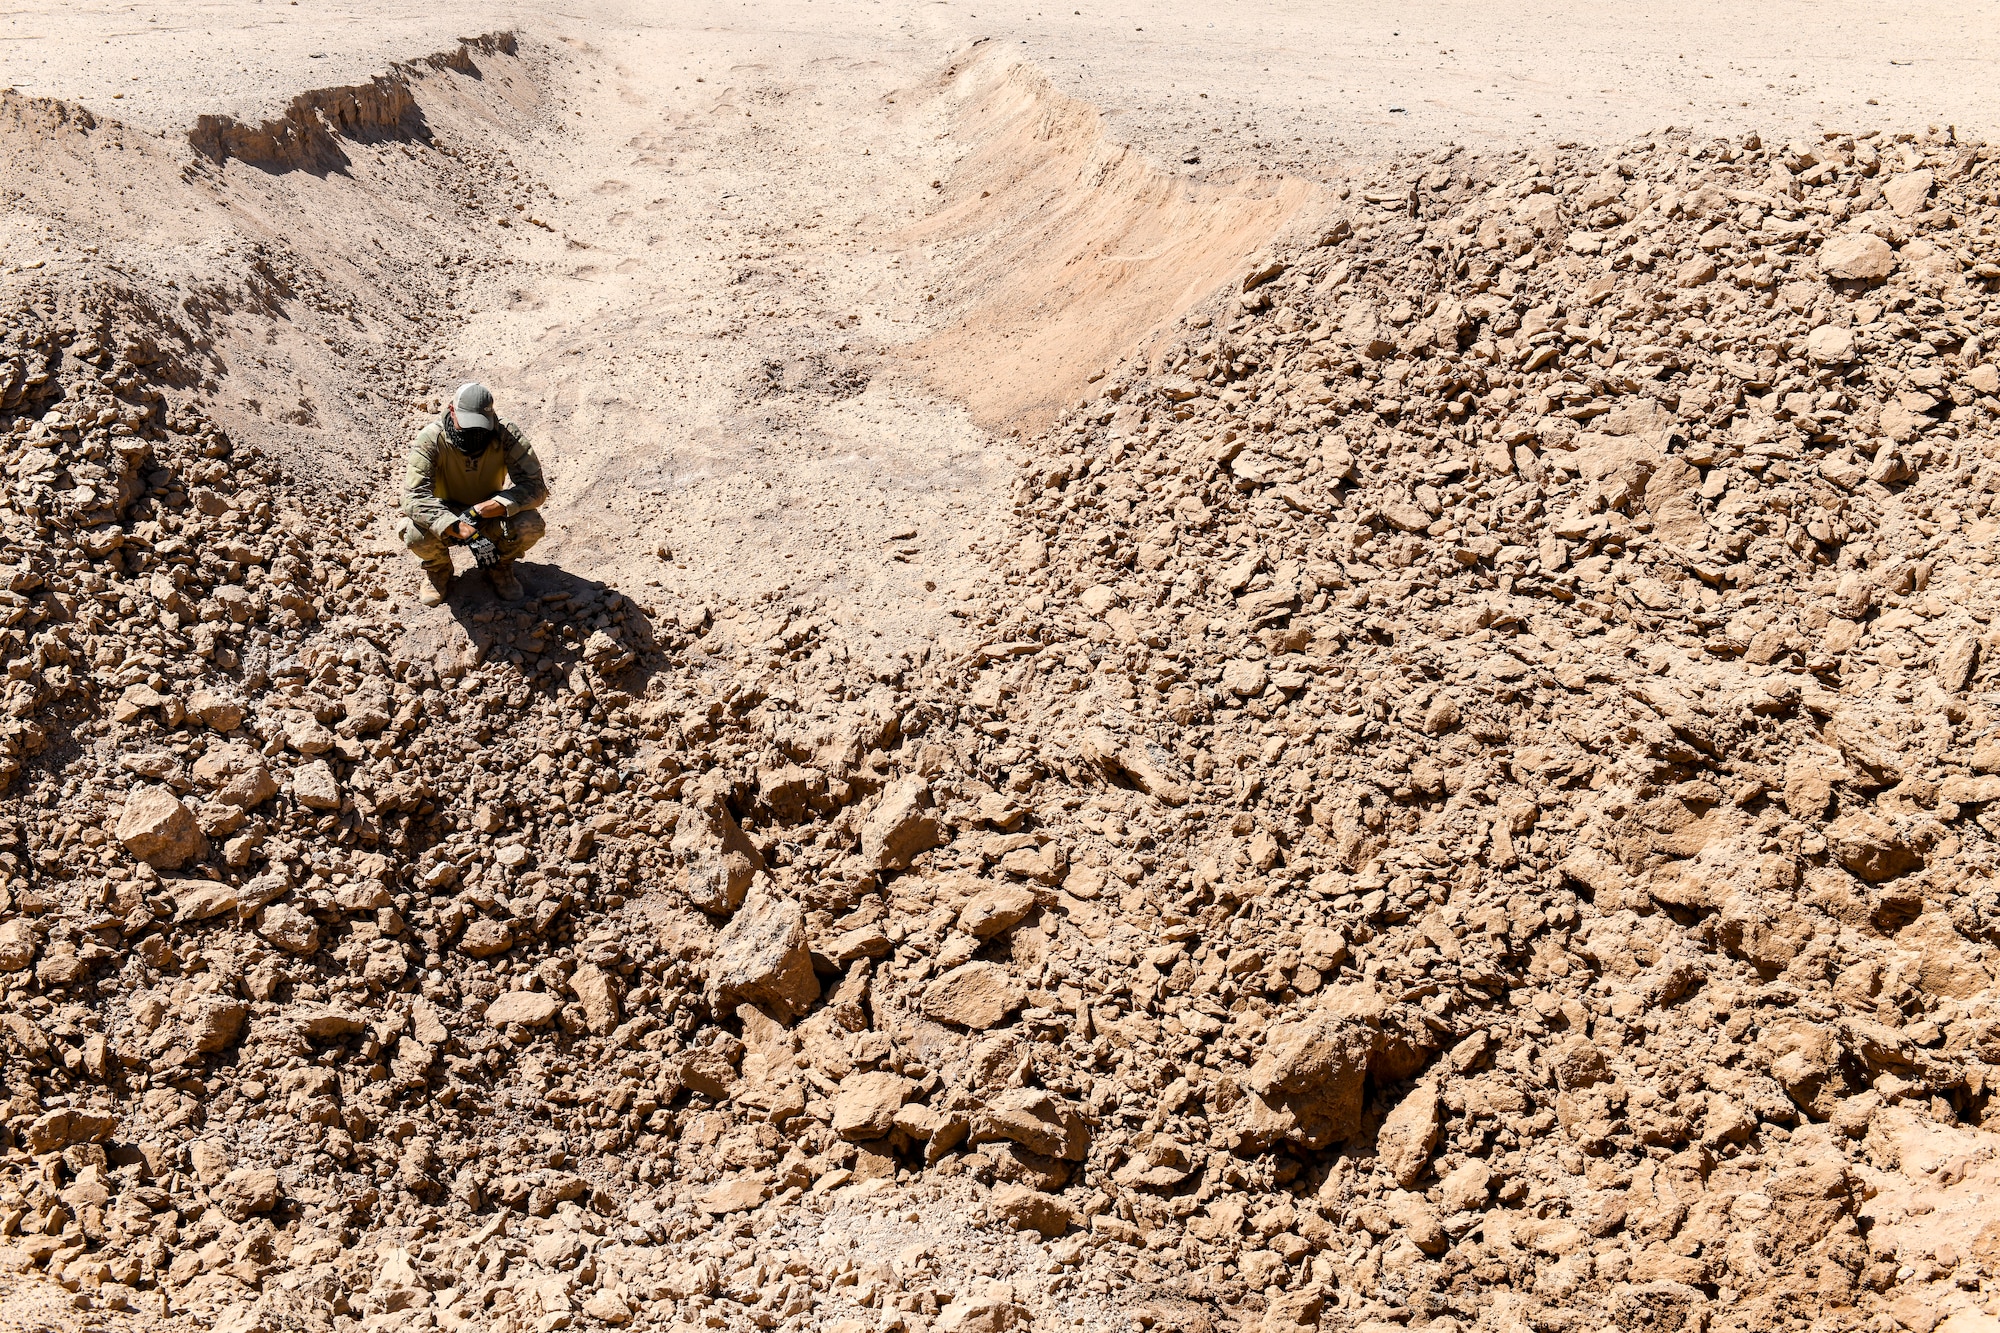 Staff Sgt. Jordan Jones, 56th Civil Engineer Squadron Explosive Ordnance Disposal team member, assigned to Luke Air Force Base, Ariz., inspects the aftermath of an explosion Sept. 12, 2019, at the Barry M. Goldwater Range near Gila Bend, Ariz.